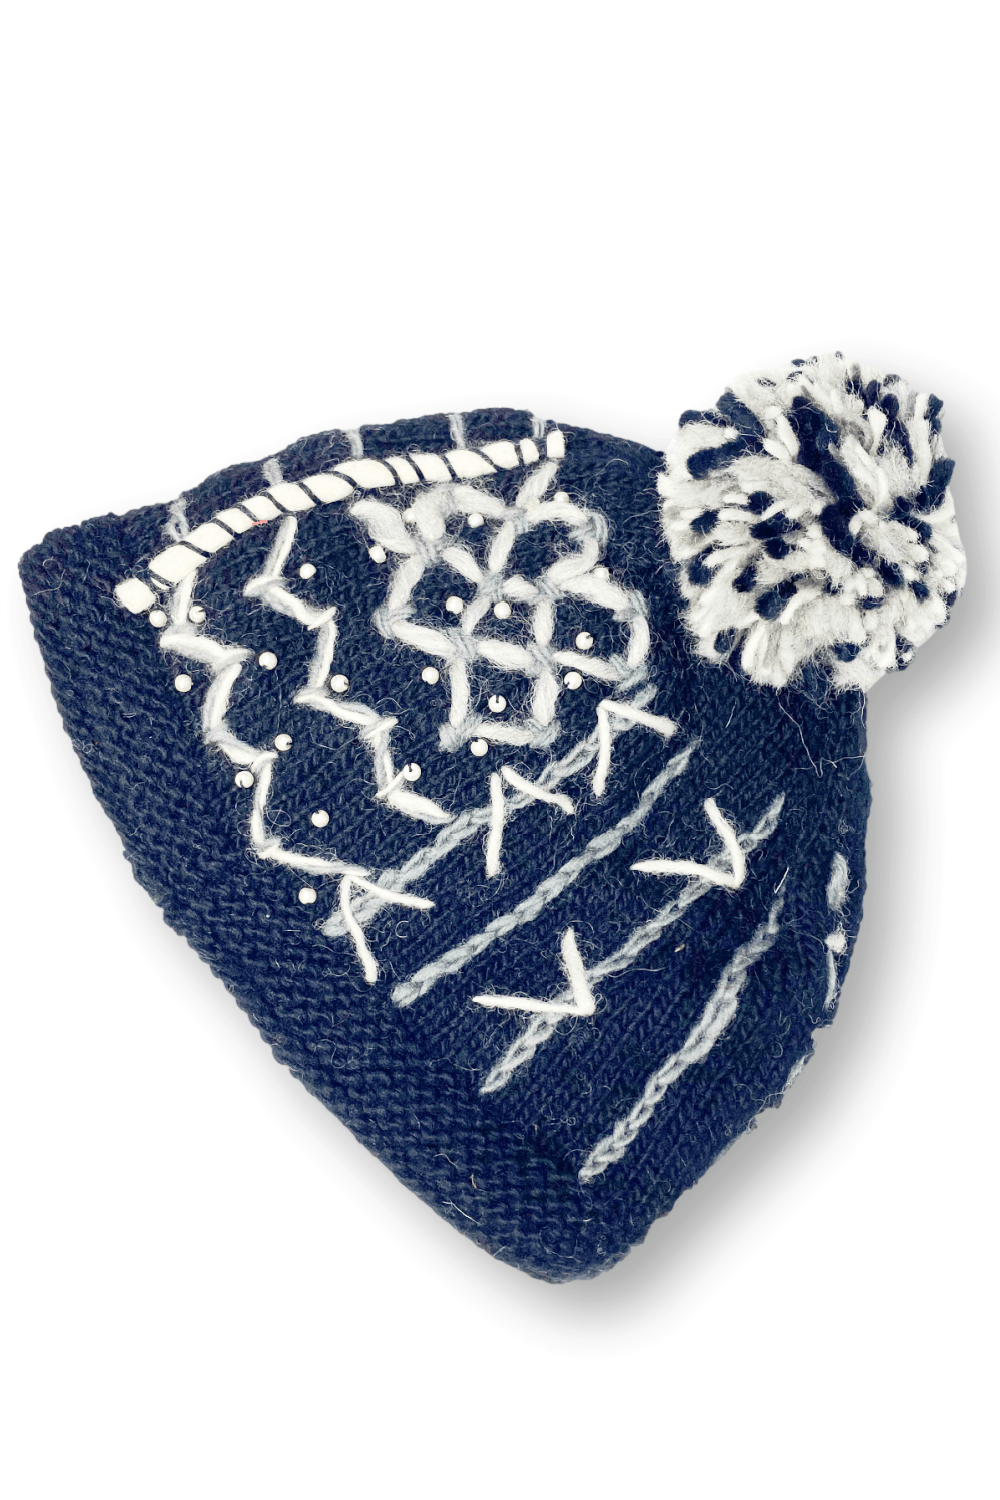 Woman's wool beanie with fleece lining decorated with with stiching and a black and white pom pom.